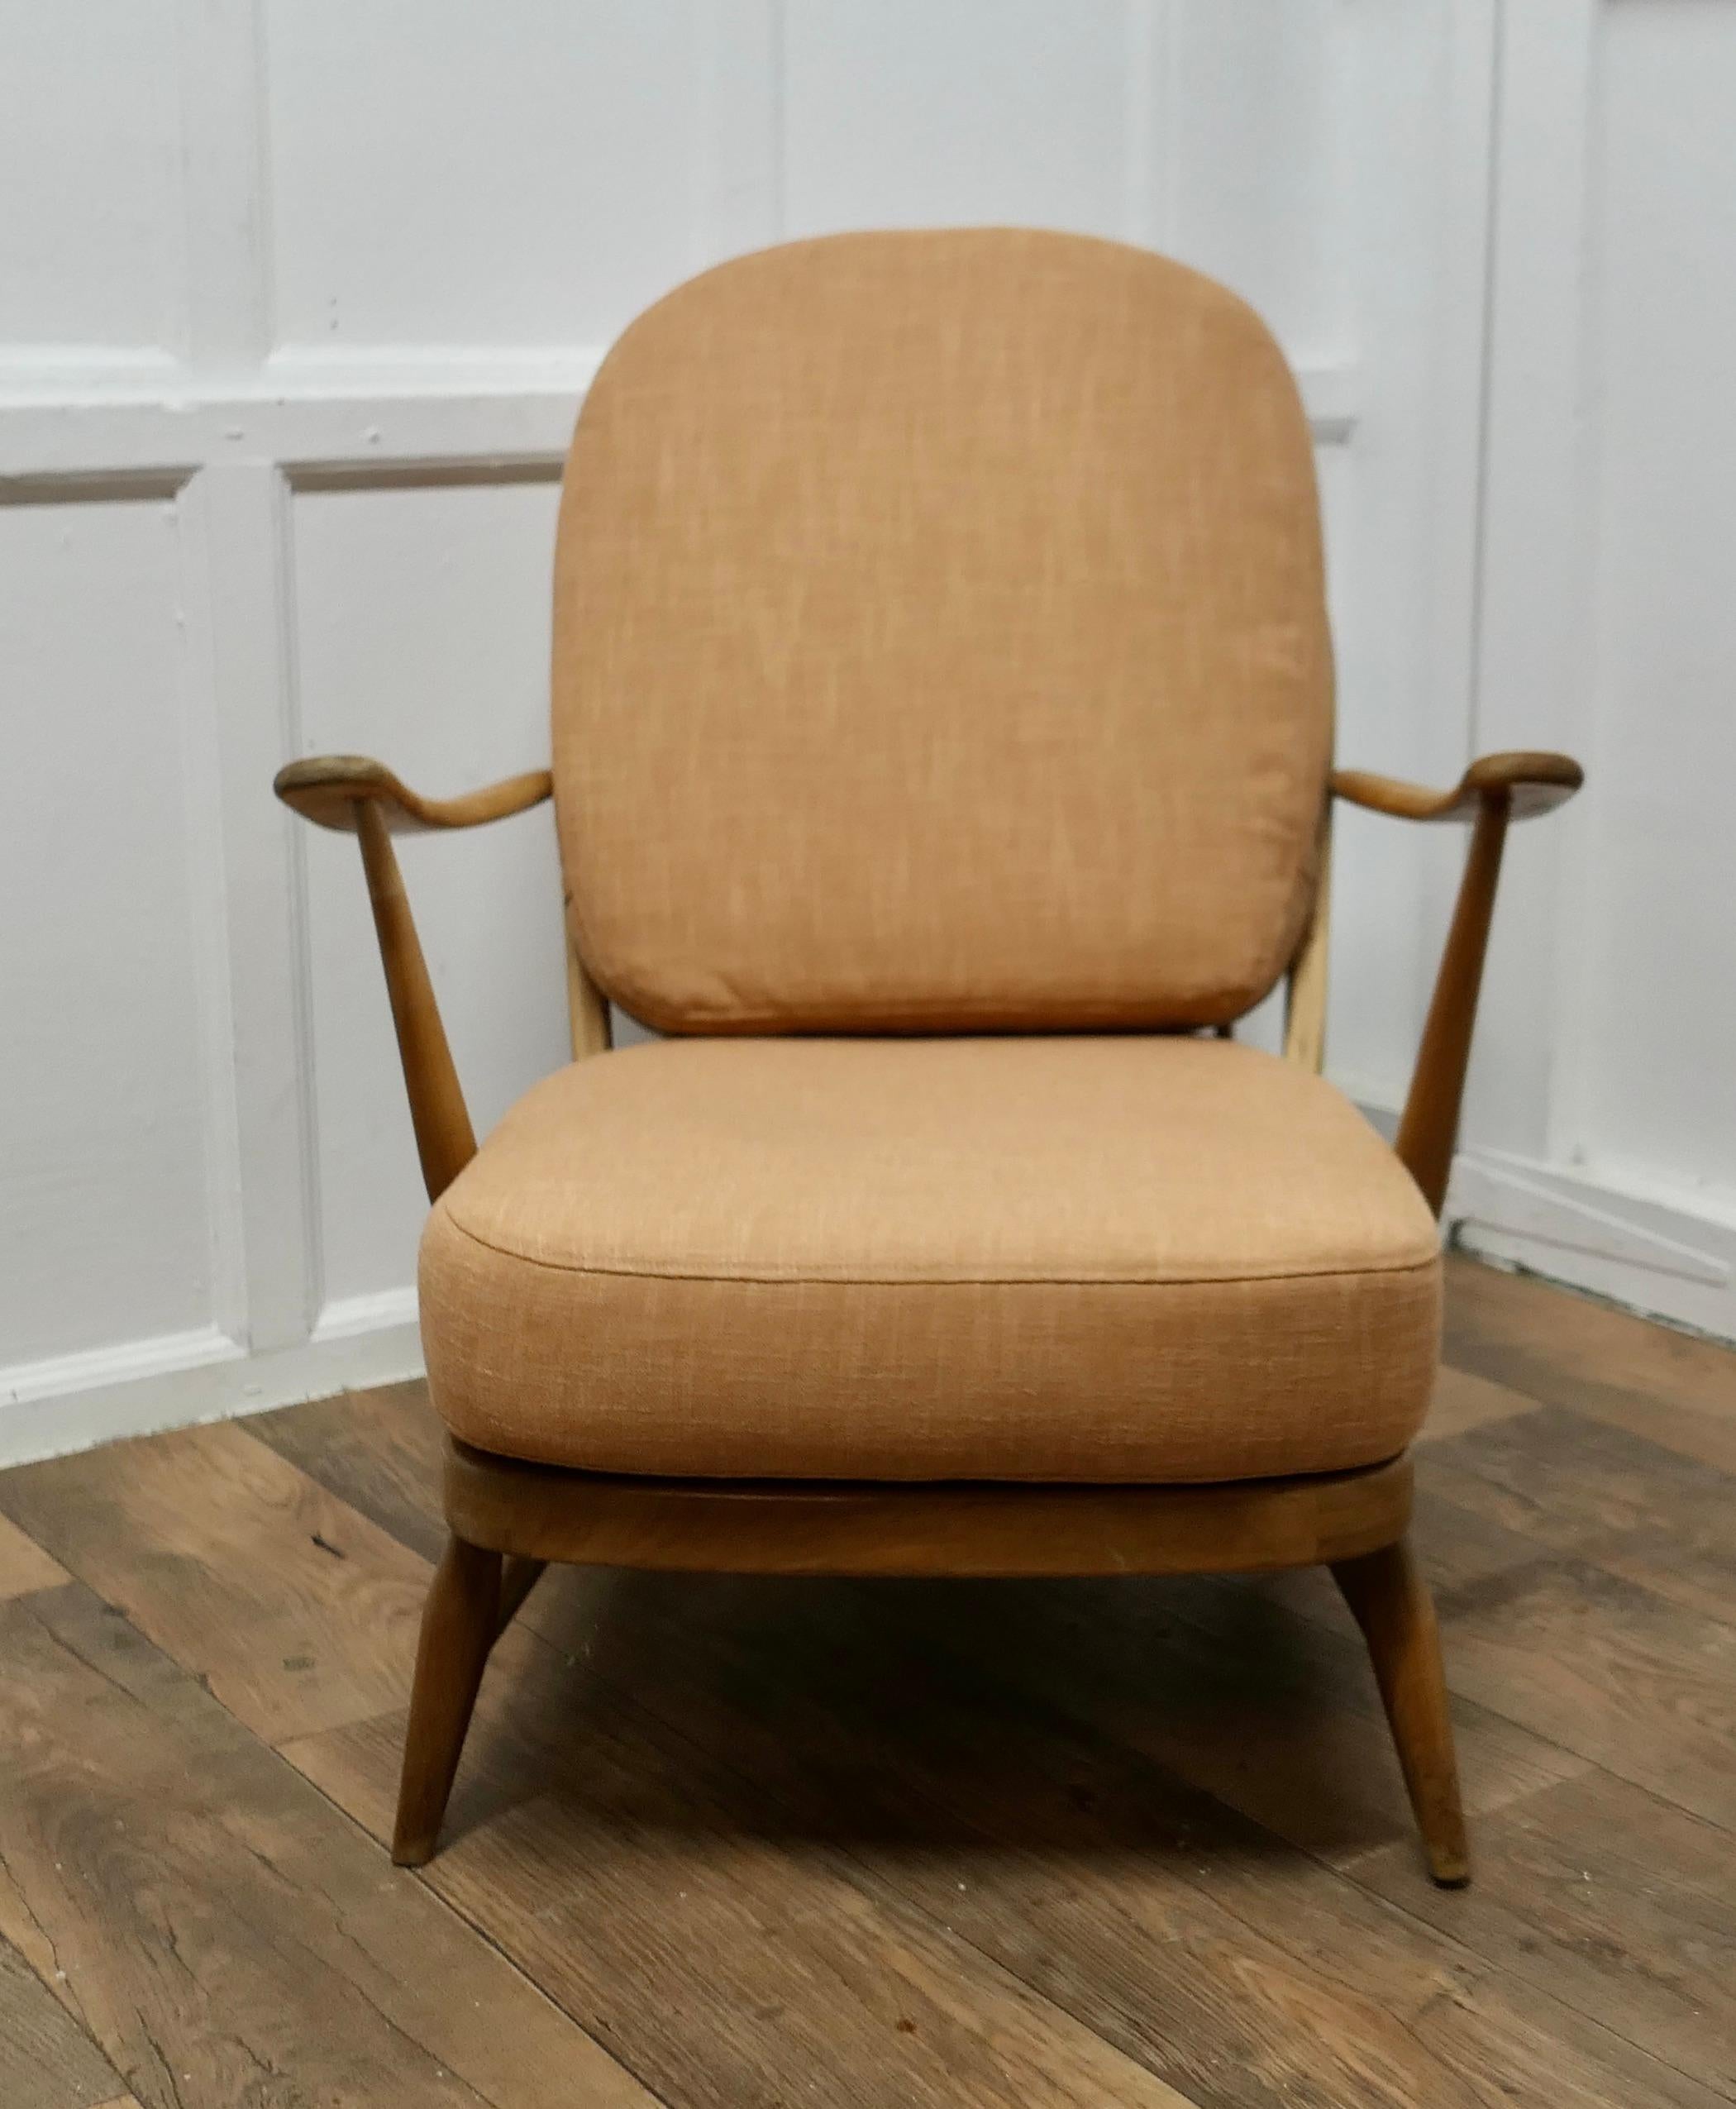 Mid-20th Century Ercol Windsor Easy Chair   The chair is a classic design and traditionally made  For Sale